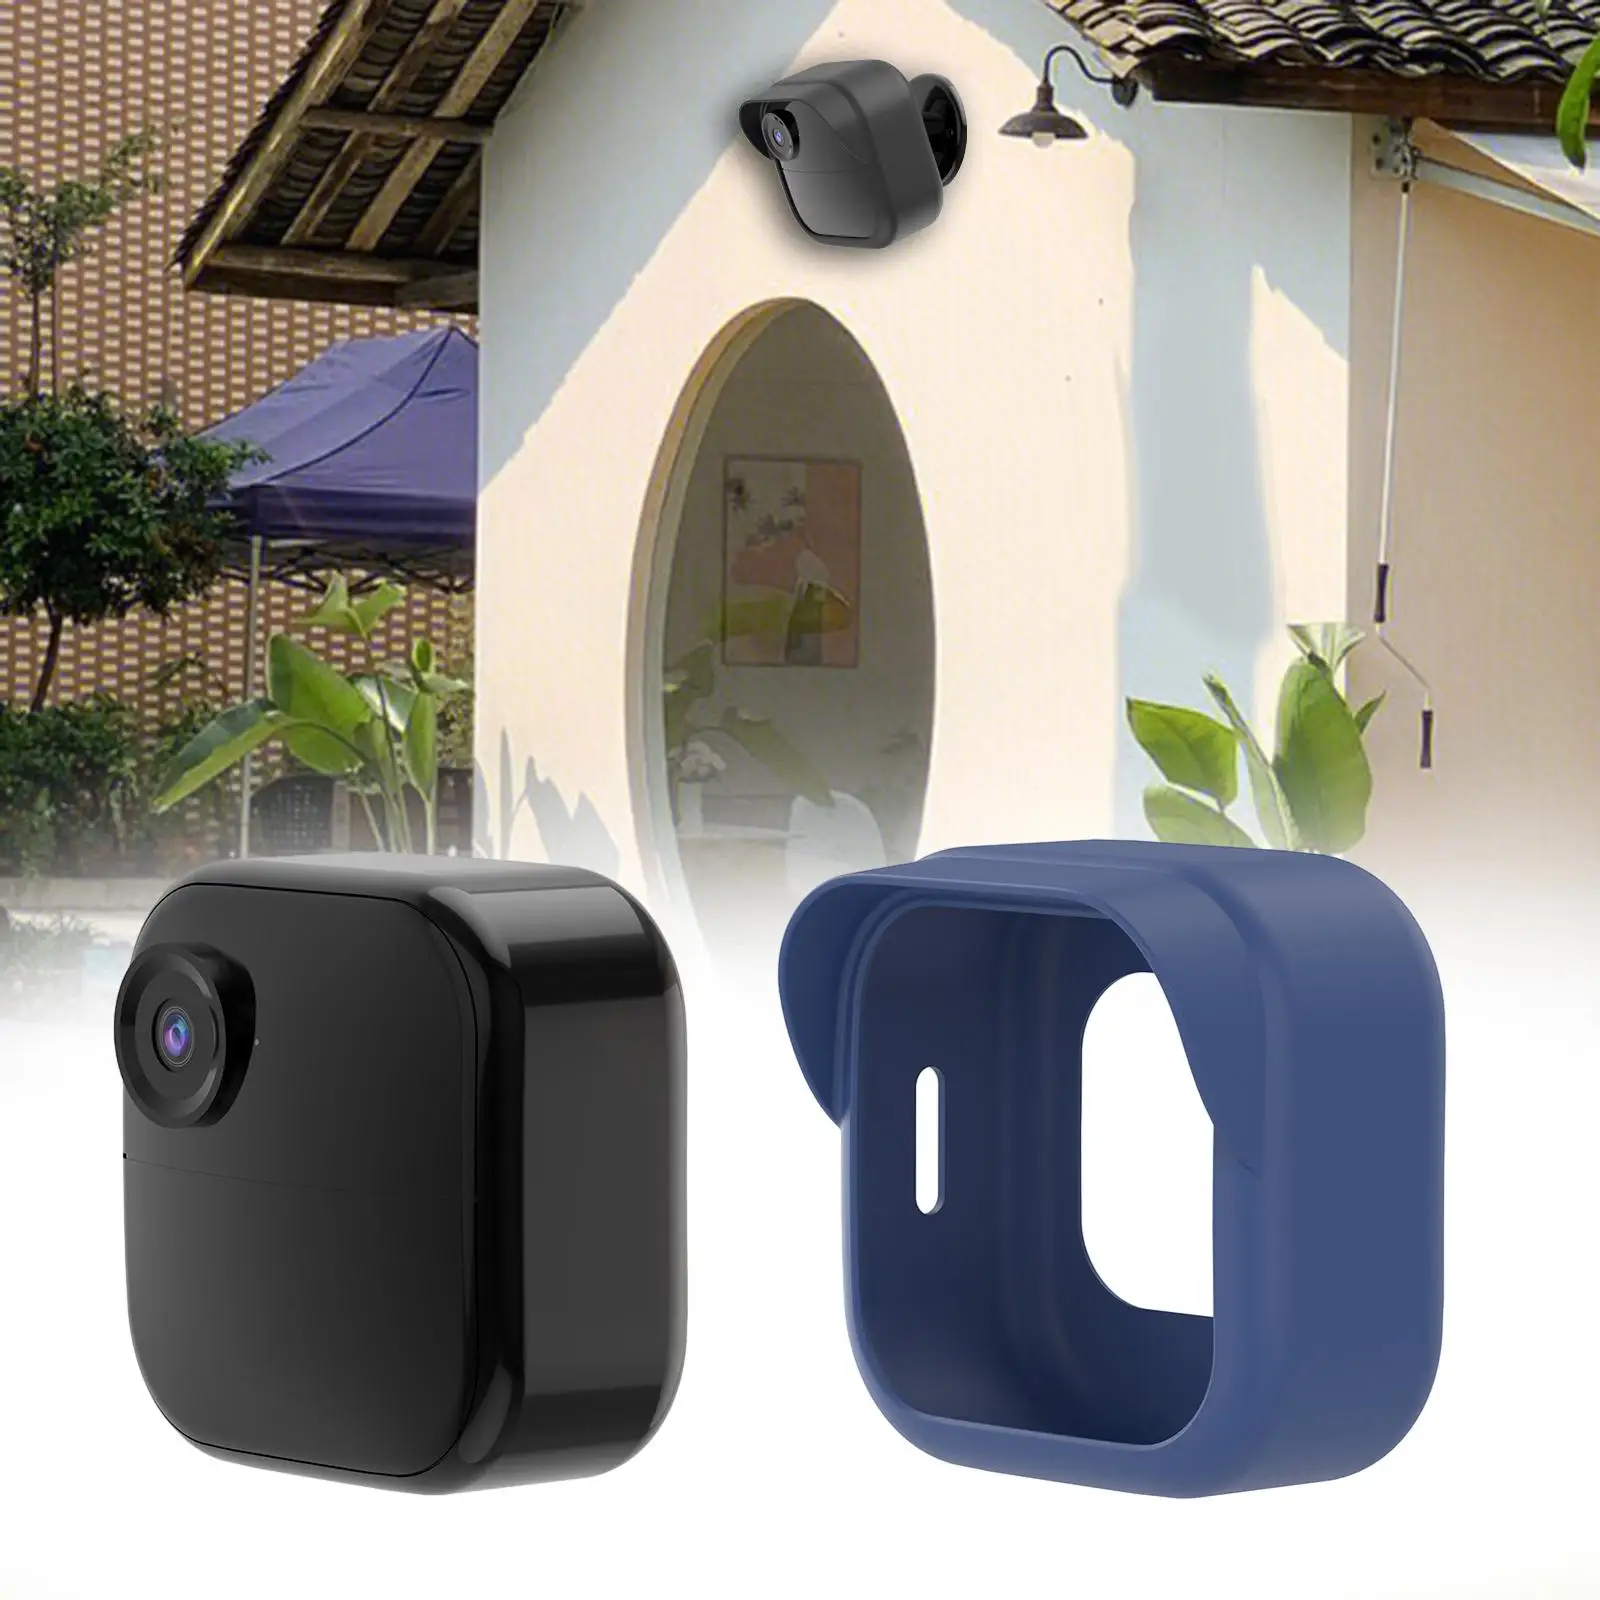 Outdoor Security Camera Cover, Anti Scratch, Dustproof, Rainproof Protective Cover Silicone Skin for Blink Outdoor 4